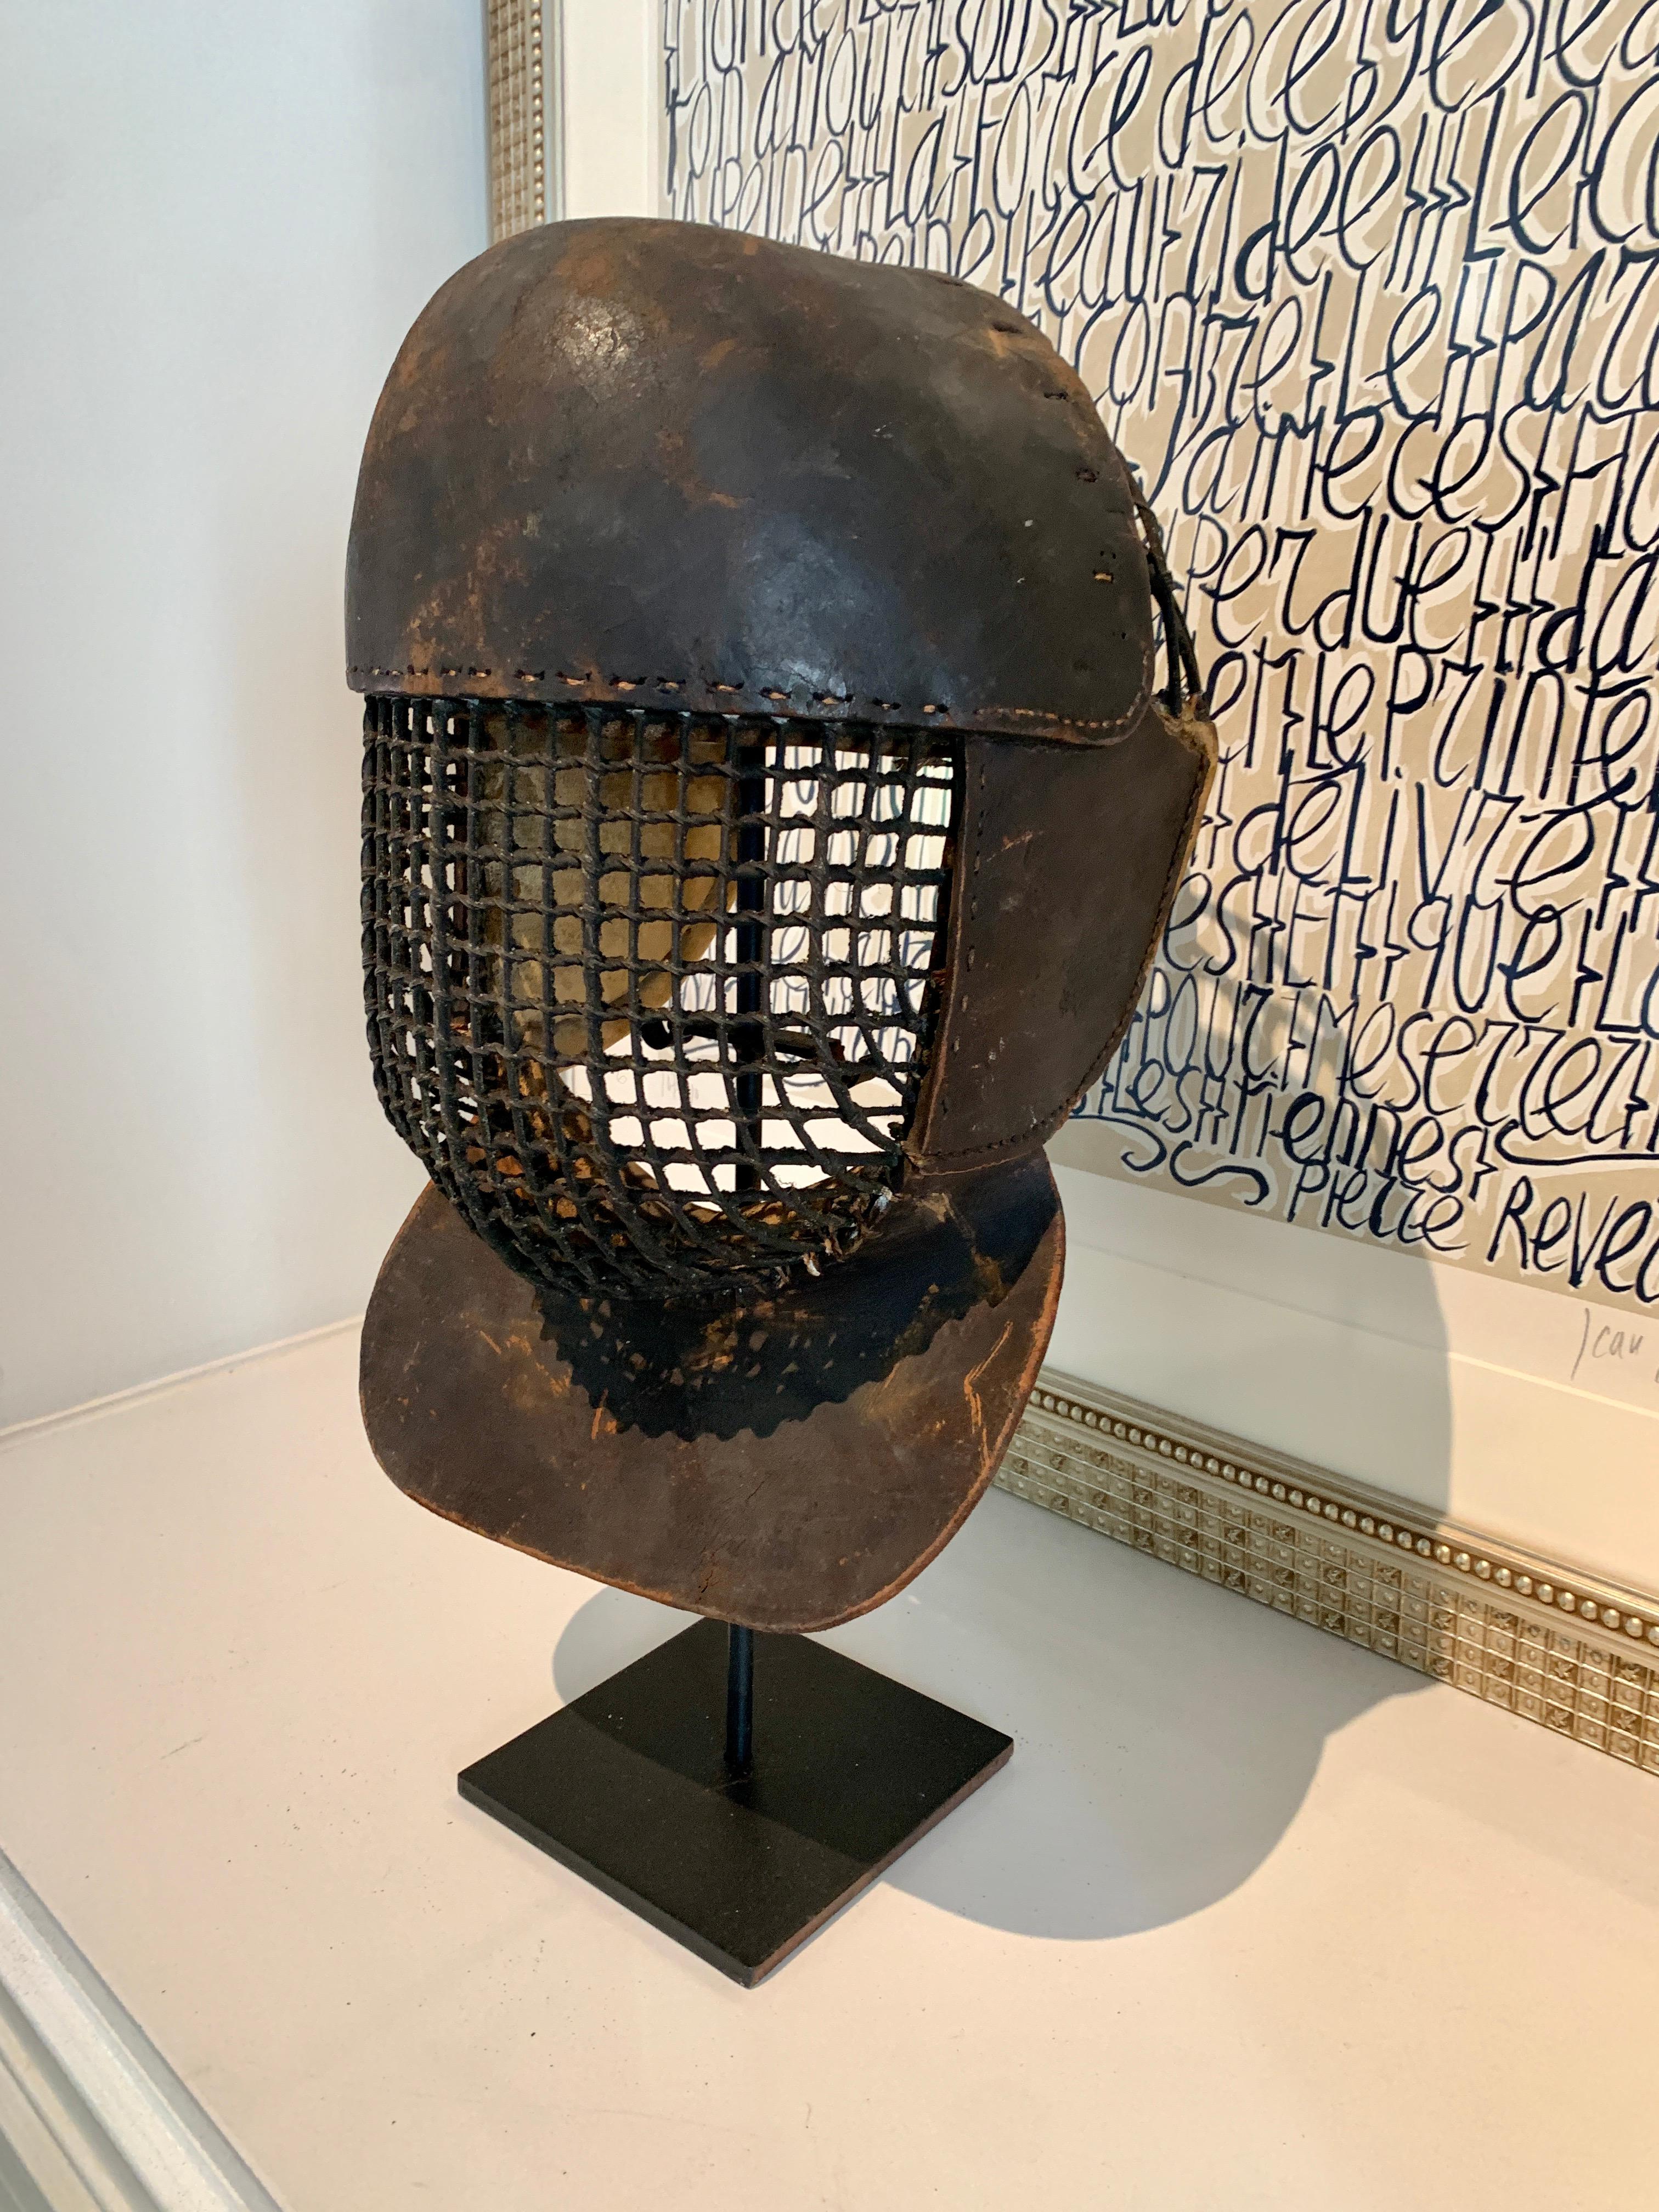 A heavily Patinated 19th century leather Fencing mask. An extraordinary piece, with beautifully hand stitched leather, metal front grill and Padded fabric lined head piece - an original ribbon hangs from the reverse. Highly decorative and a